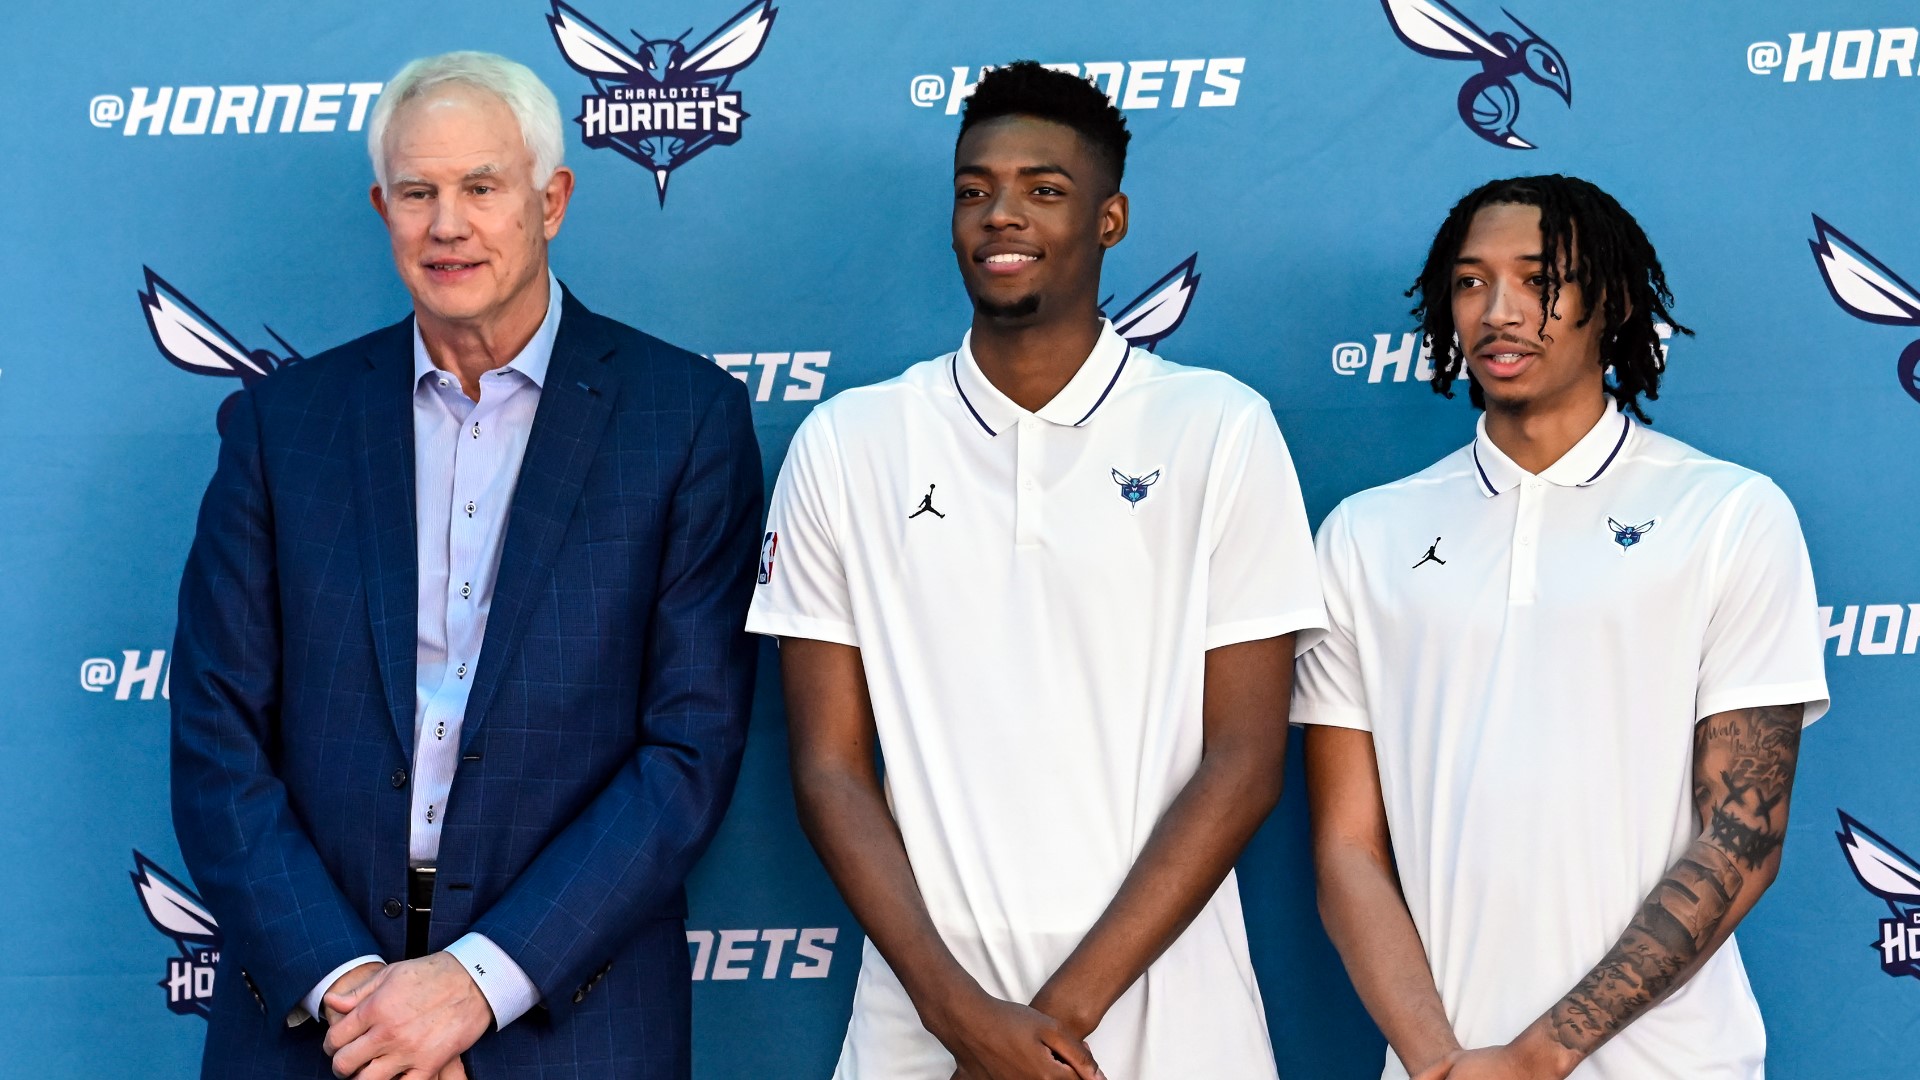 Charlotte Hornets: Full roster, players and coaches - Hispanosnba.com